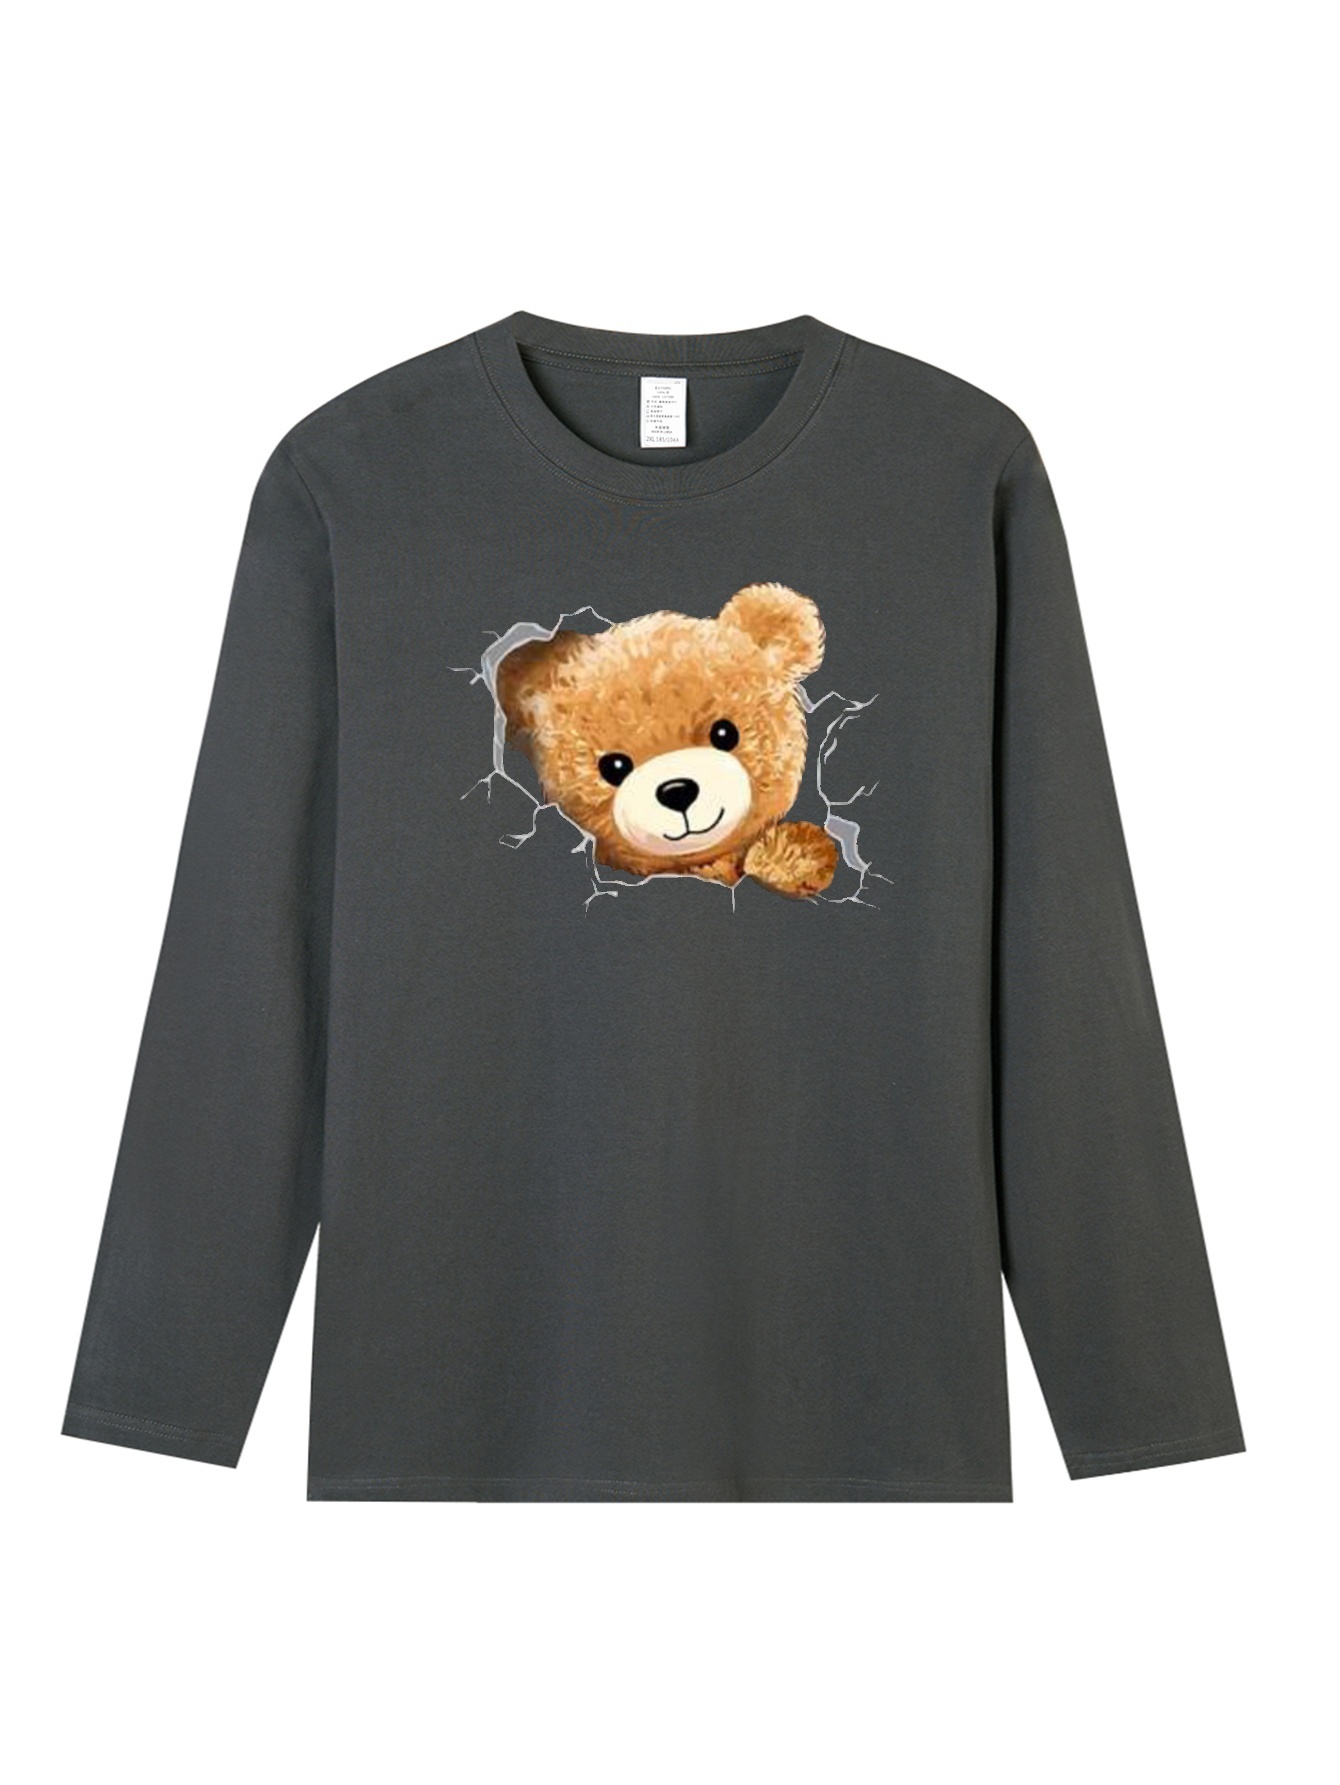 Teddy Bear Graffiti Smile Various Print Mens Trendy Cotton T Shirt Casual  Slightly Stretch Breathable Long Sleeve Top For Outdoor Mens Clothing Gift  For Men, Free Shipping For New Users